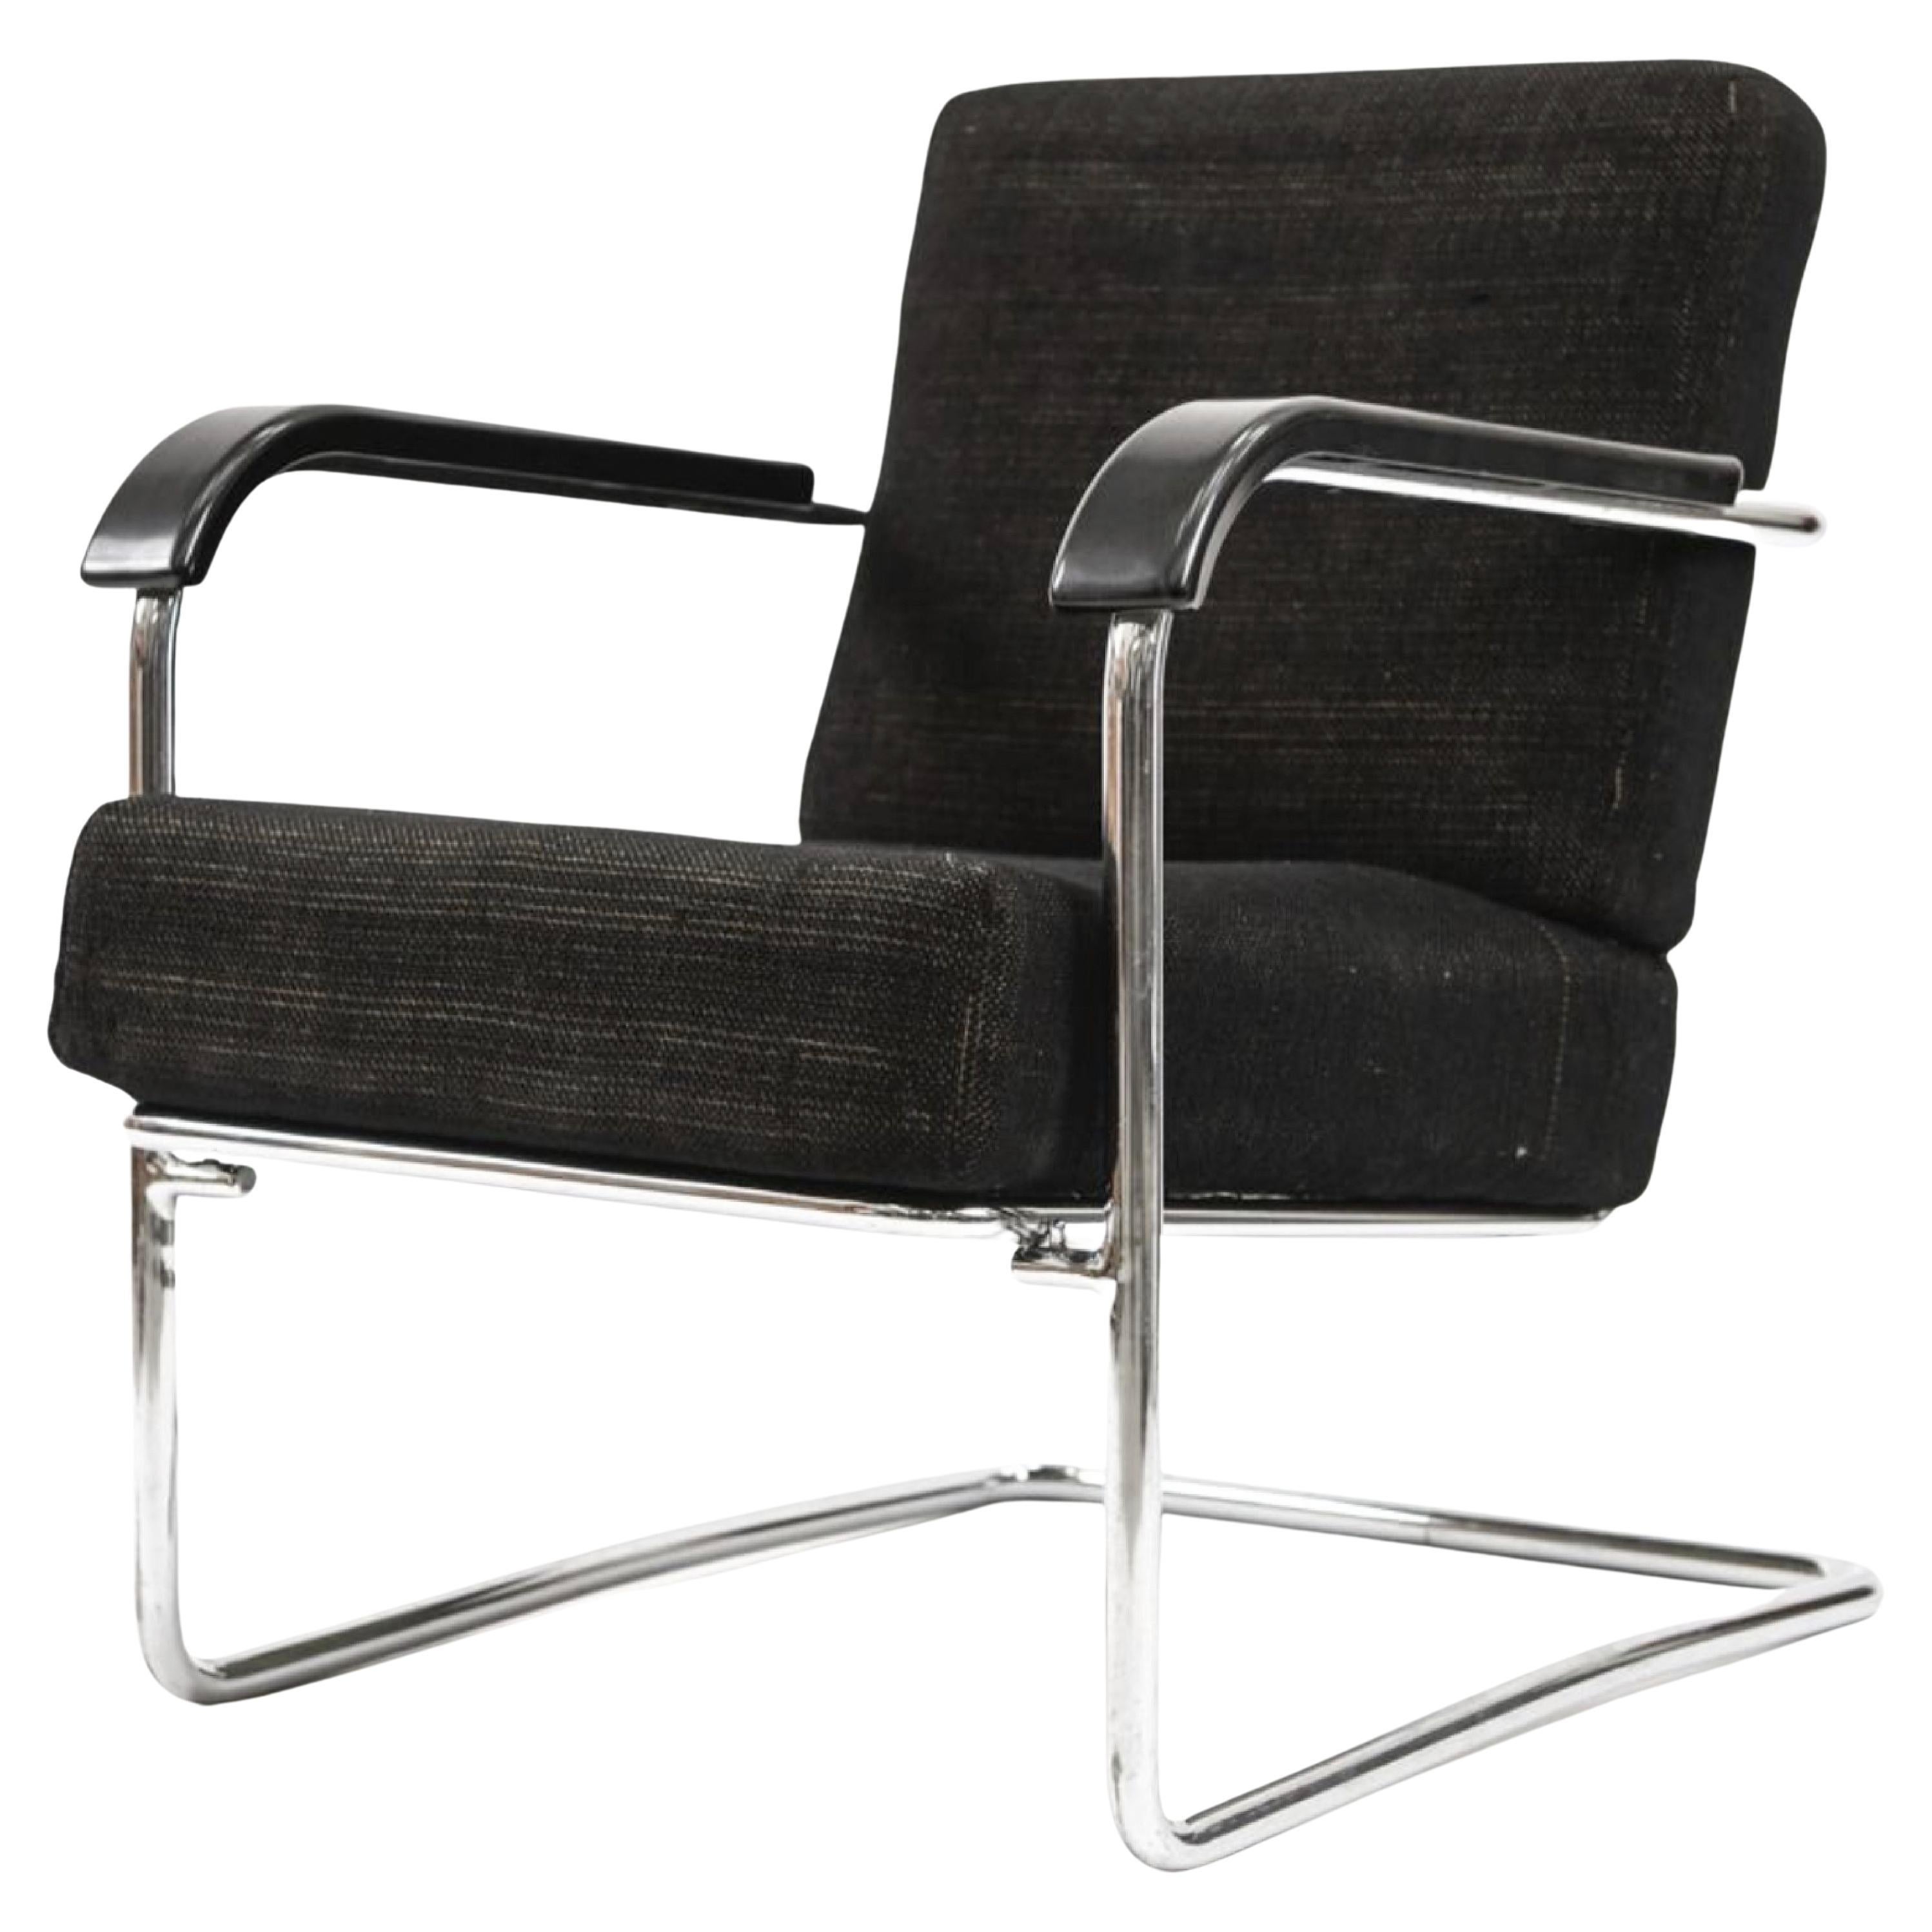 Werner Max Moser for Embru Wohnbedarf, WB21 Lounge Chair Zurich Switzerland 1935.  Rare Lounge chair by Werner Max Moser. Manufactured by Embru, Zurich Switzerland. Bauhaus chrome-plated tubular steel, bakelite armrests and woolen upholstery.